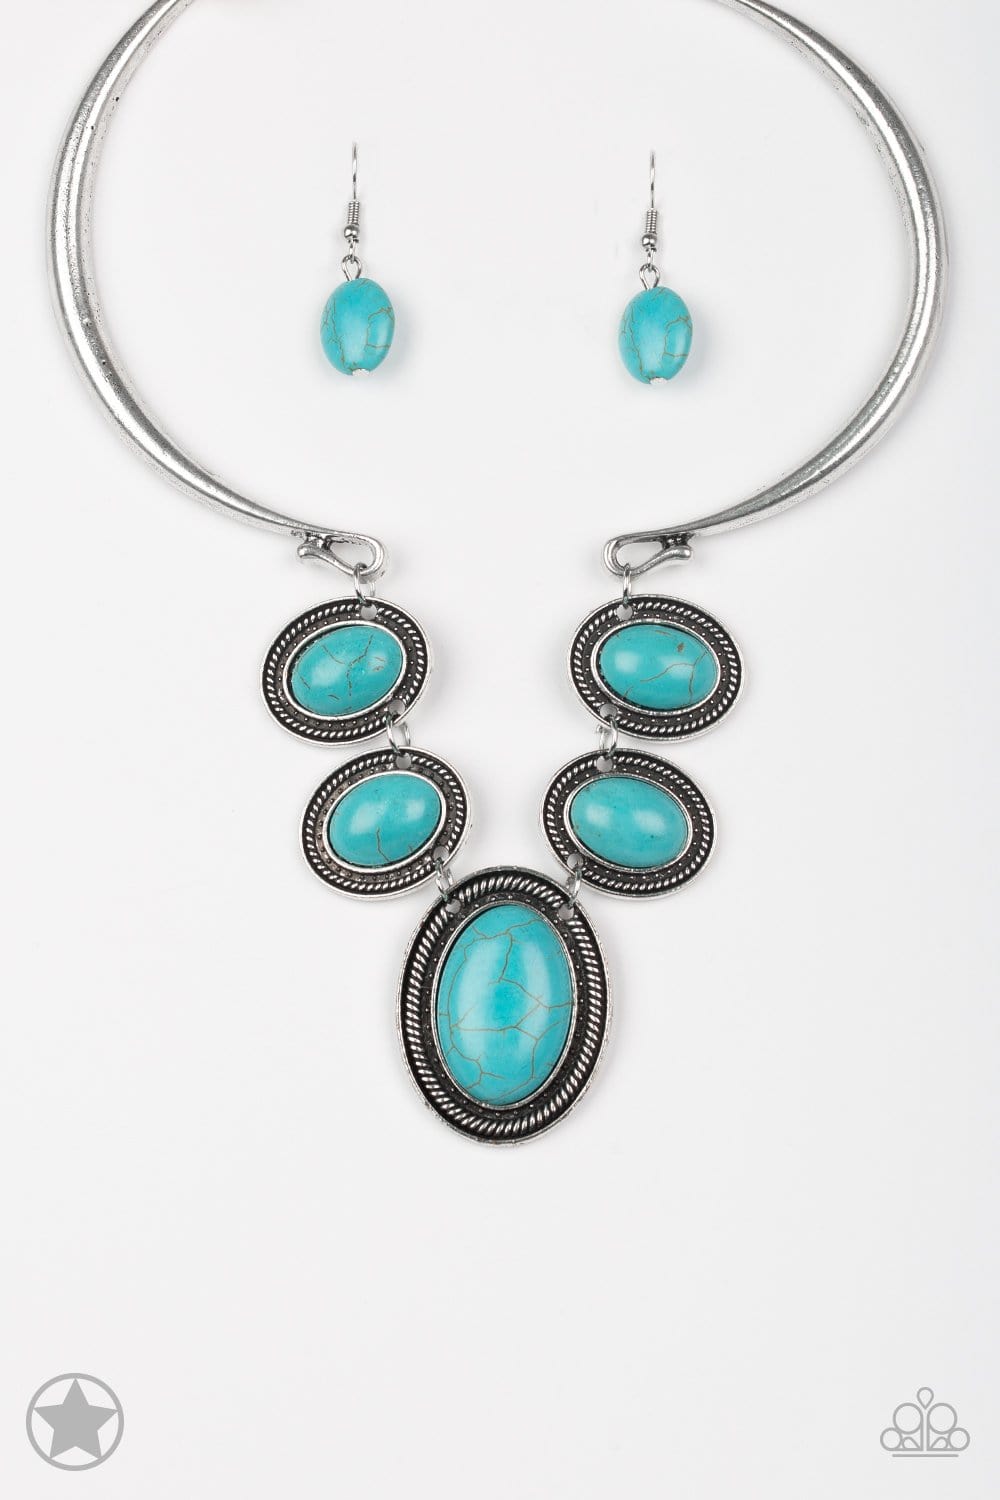 Stone Toll - Copper and Turquoise Necklace - Paparazzi Accessories